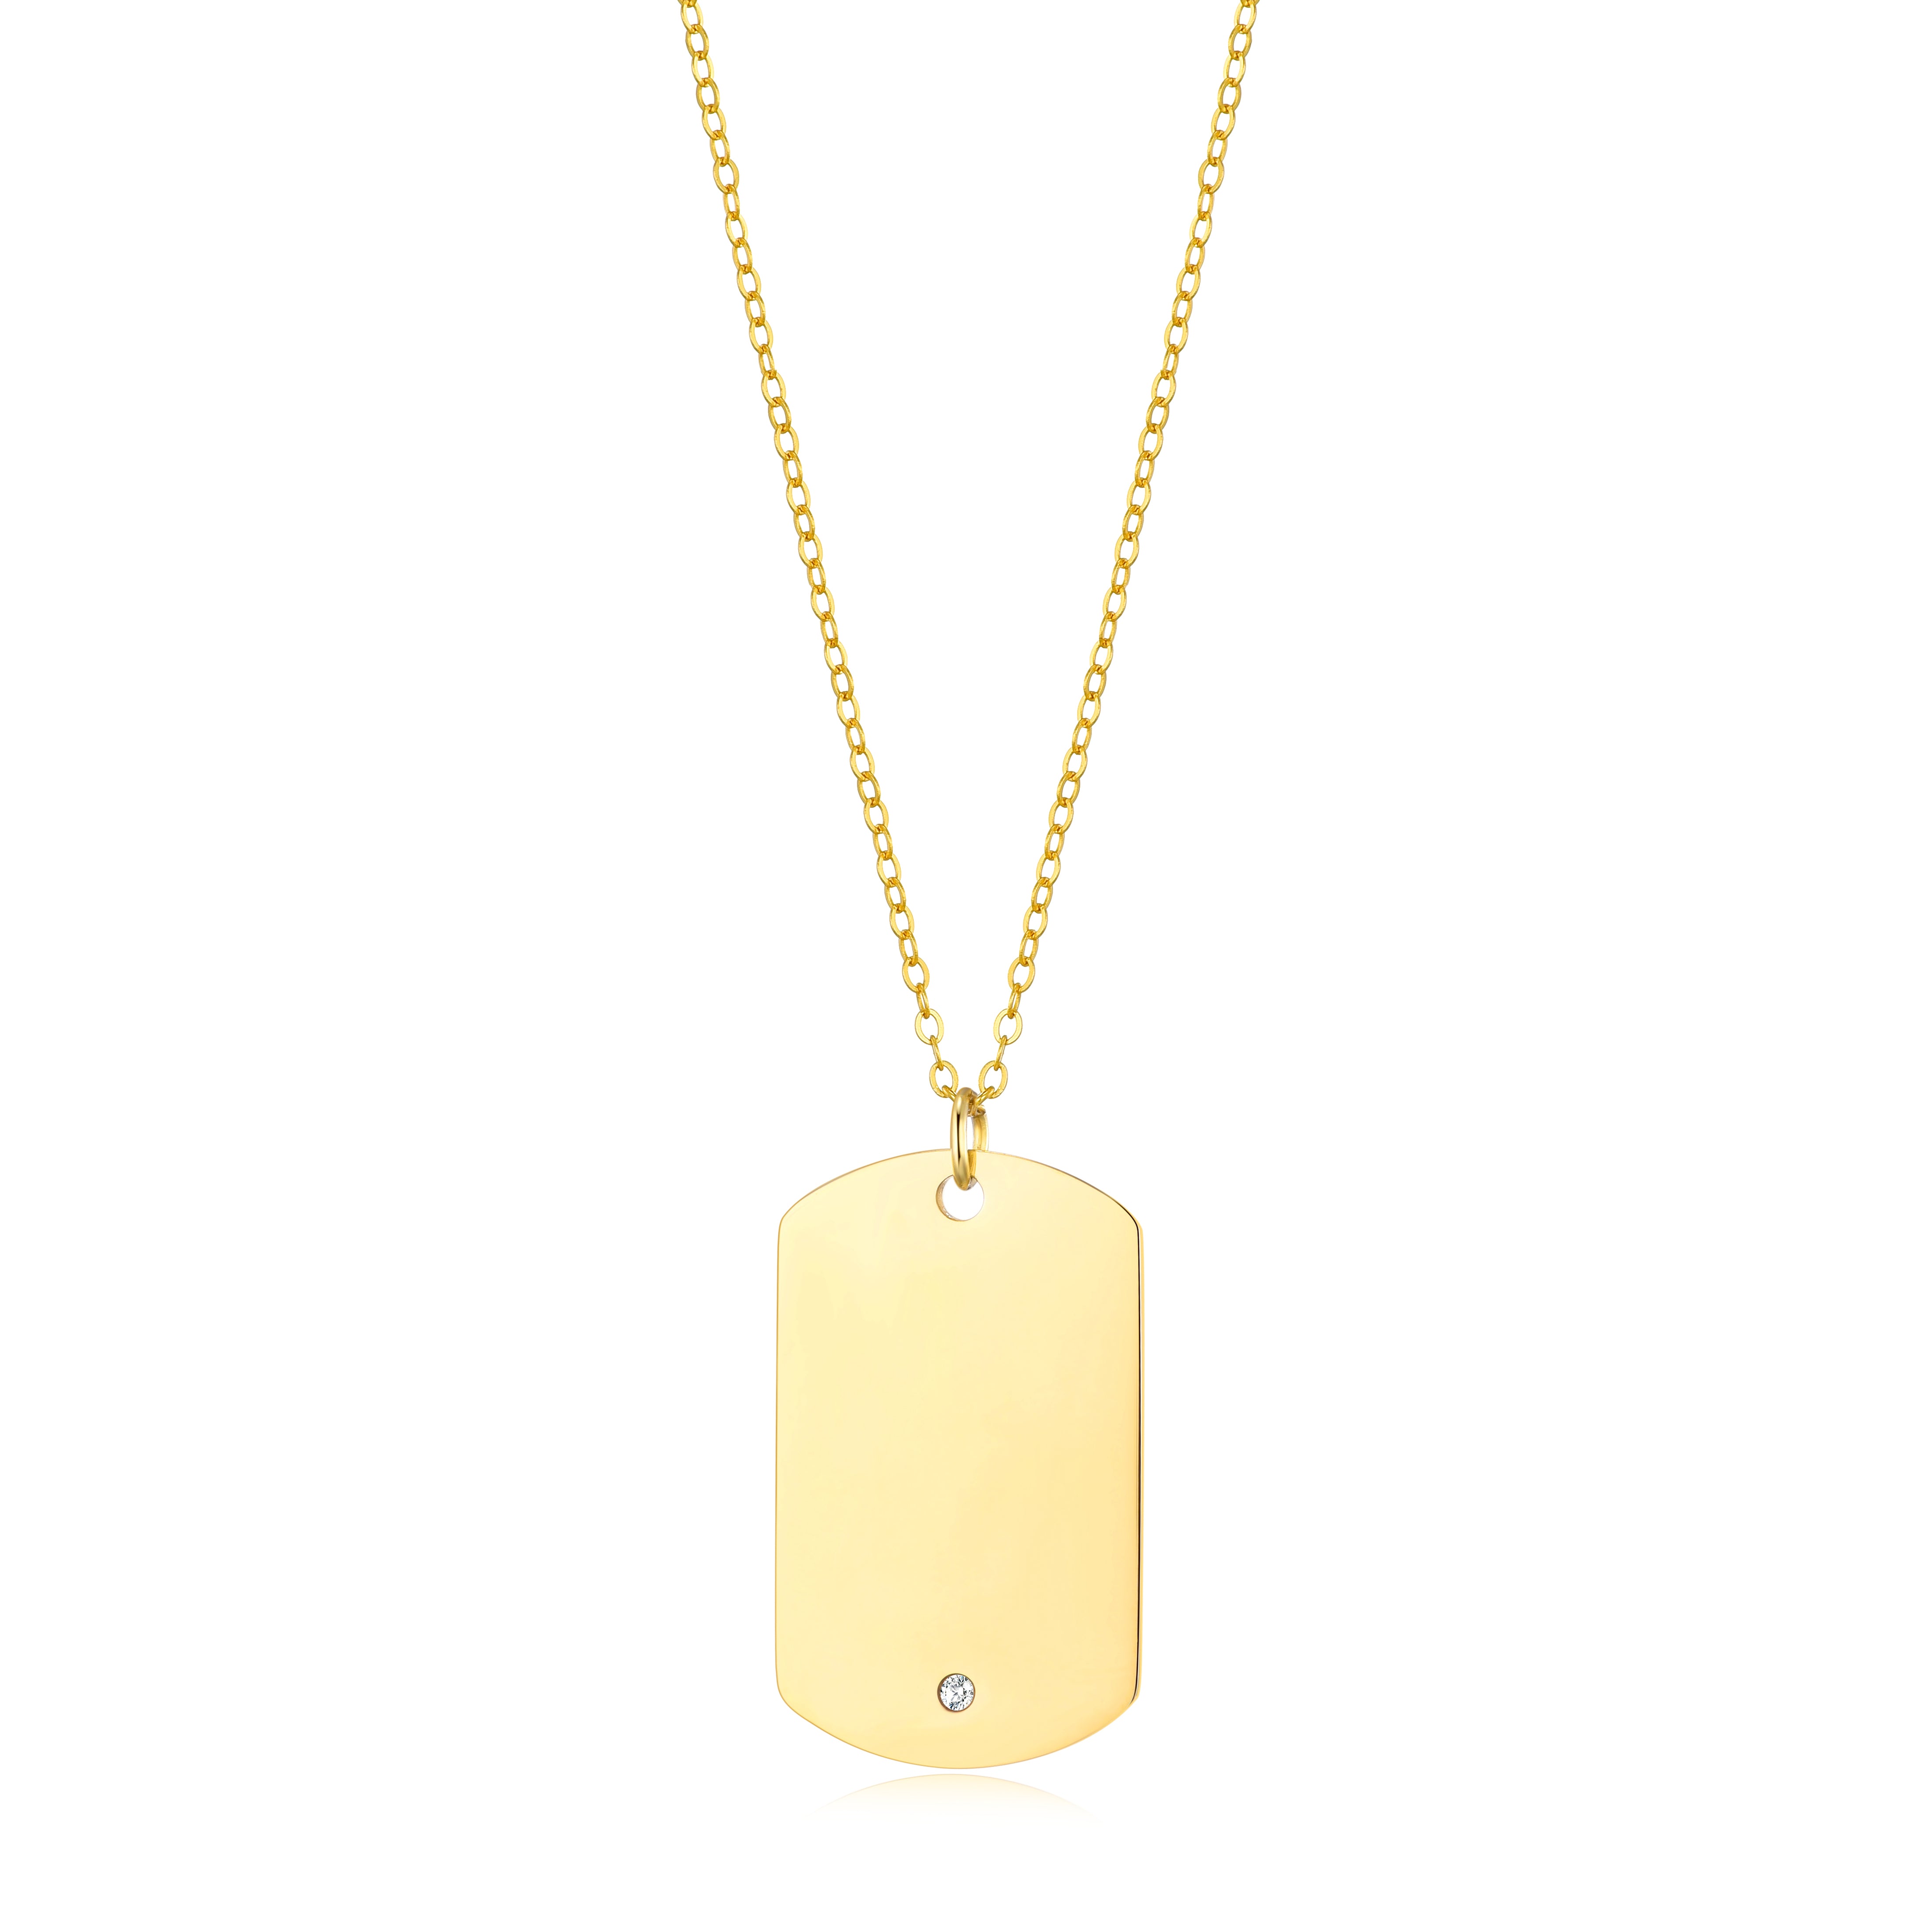 Men's Gold Plated Steel Dog Tag Necklace Created with Zircondia® Crystals by Philip Jones Jewellery